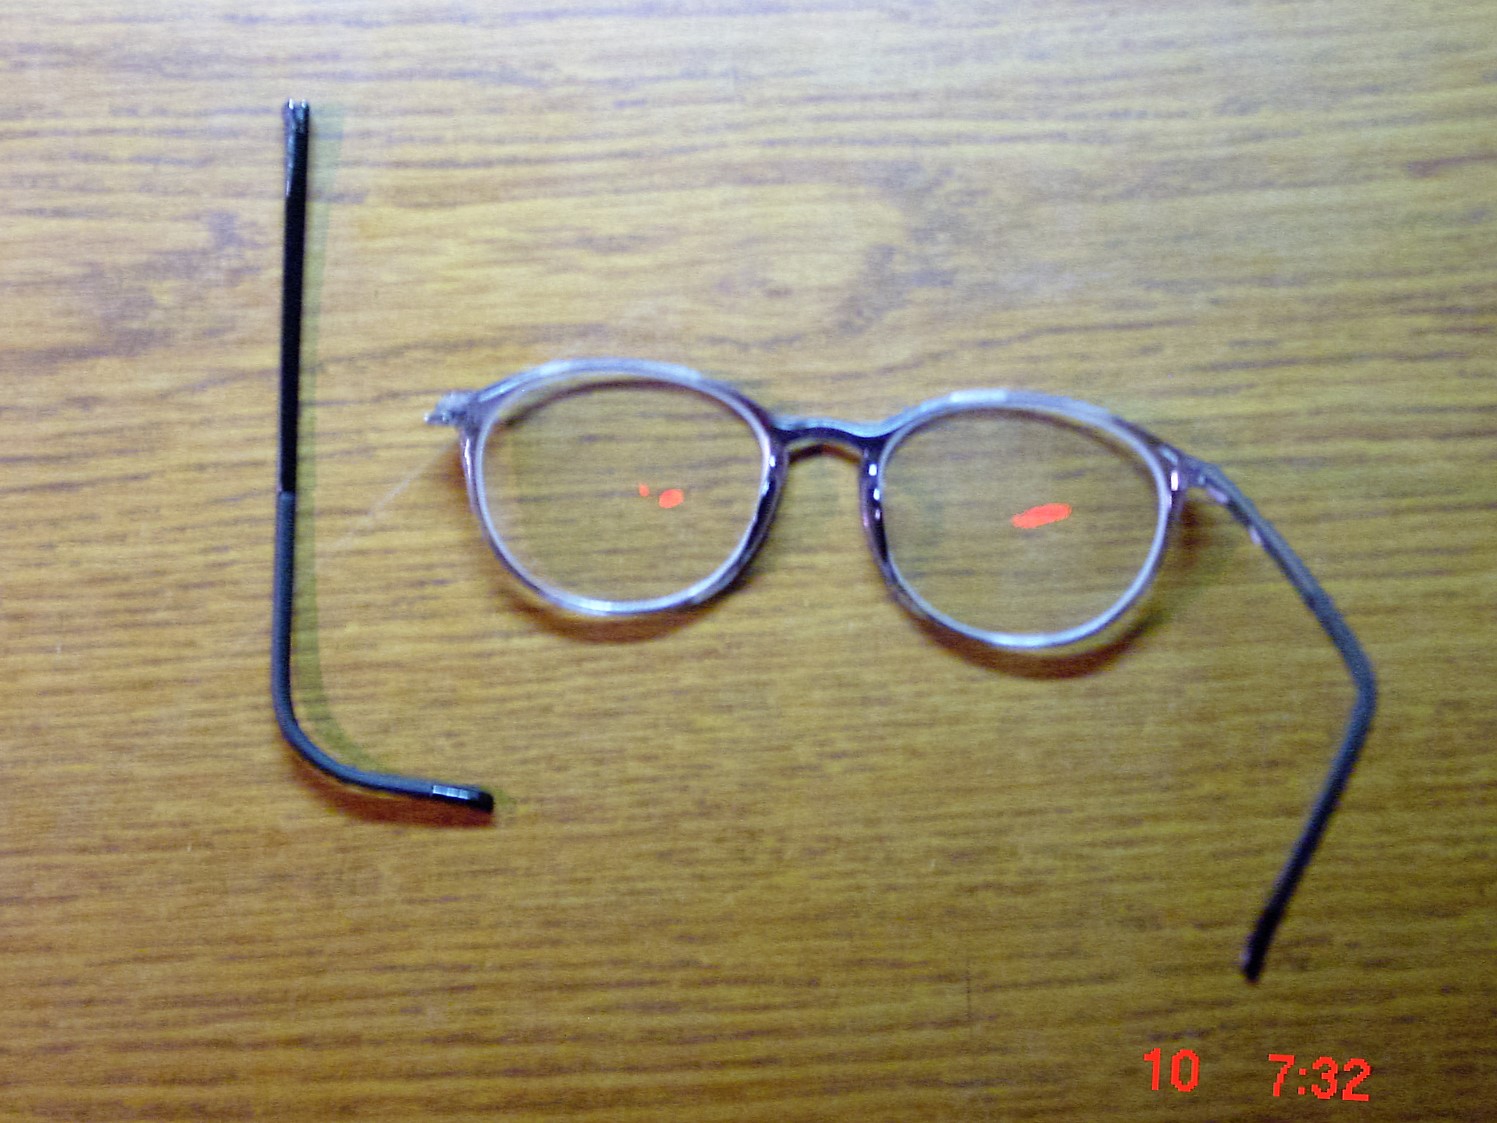 my broken glasses, as returned by Opticsfast